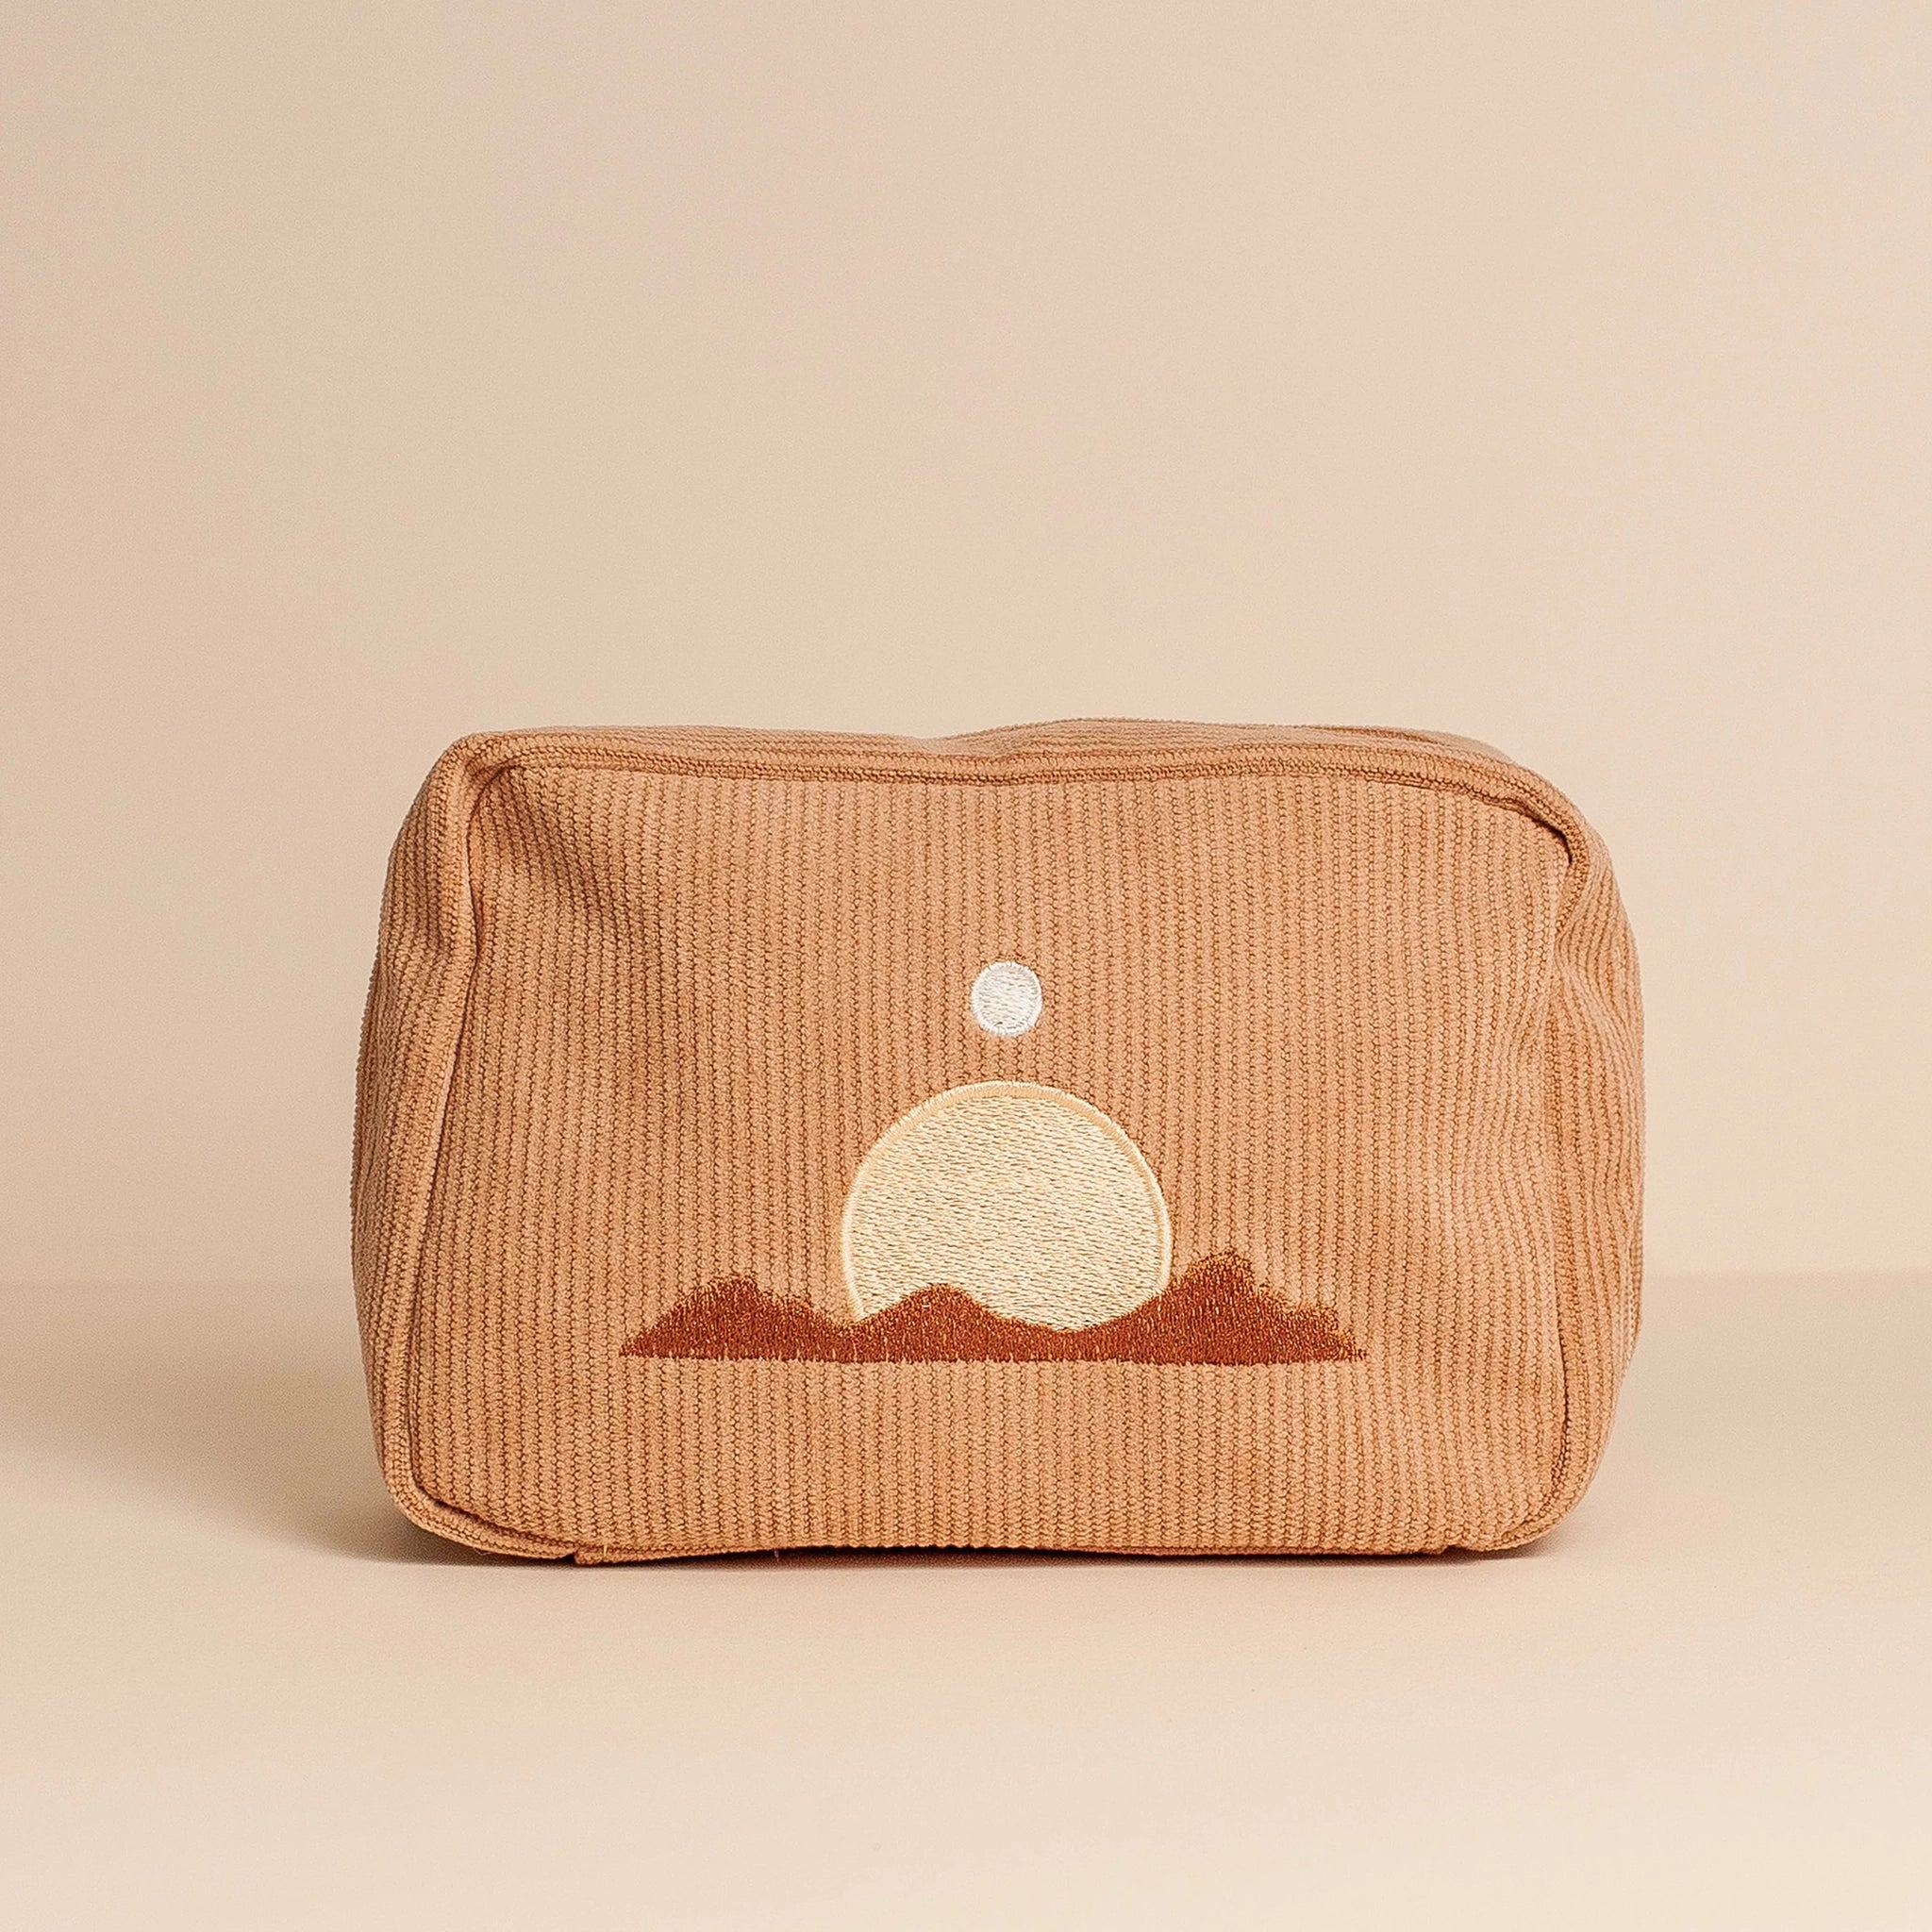 On a tan background is a peachy, tan corduroy makeup bag with a minimalist design of a desert mountain range along with the sun and moon above it. 